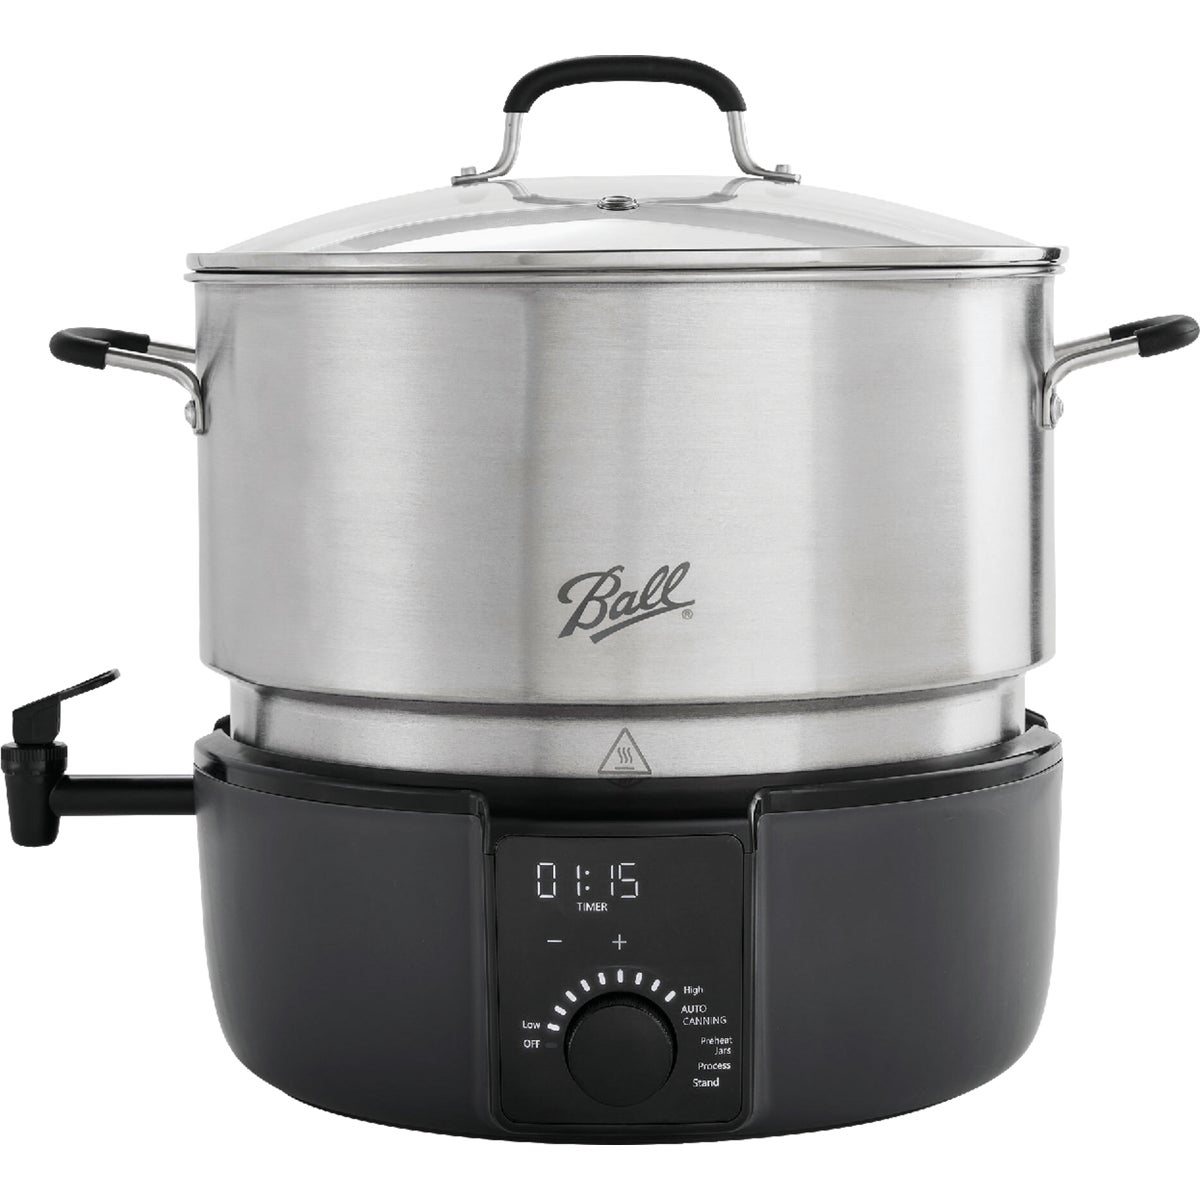 Item 602325, Electric canning system and multi-cooker for preserving, canning, steaming